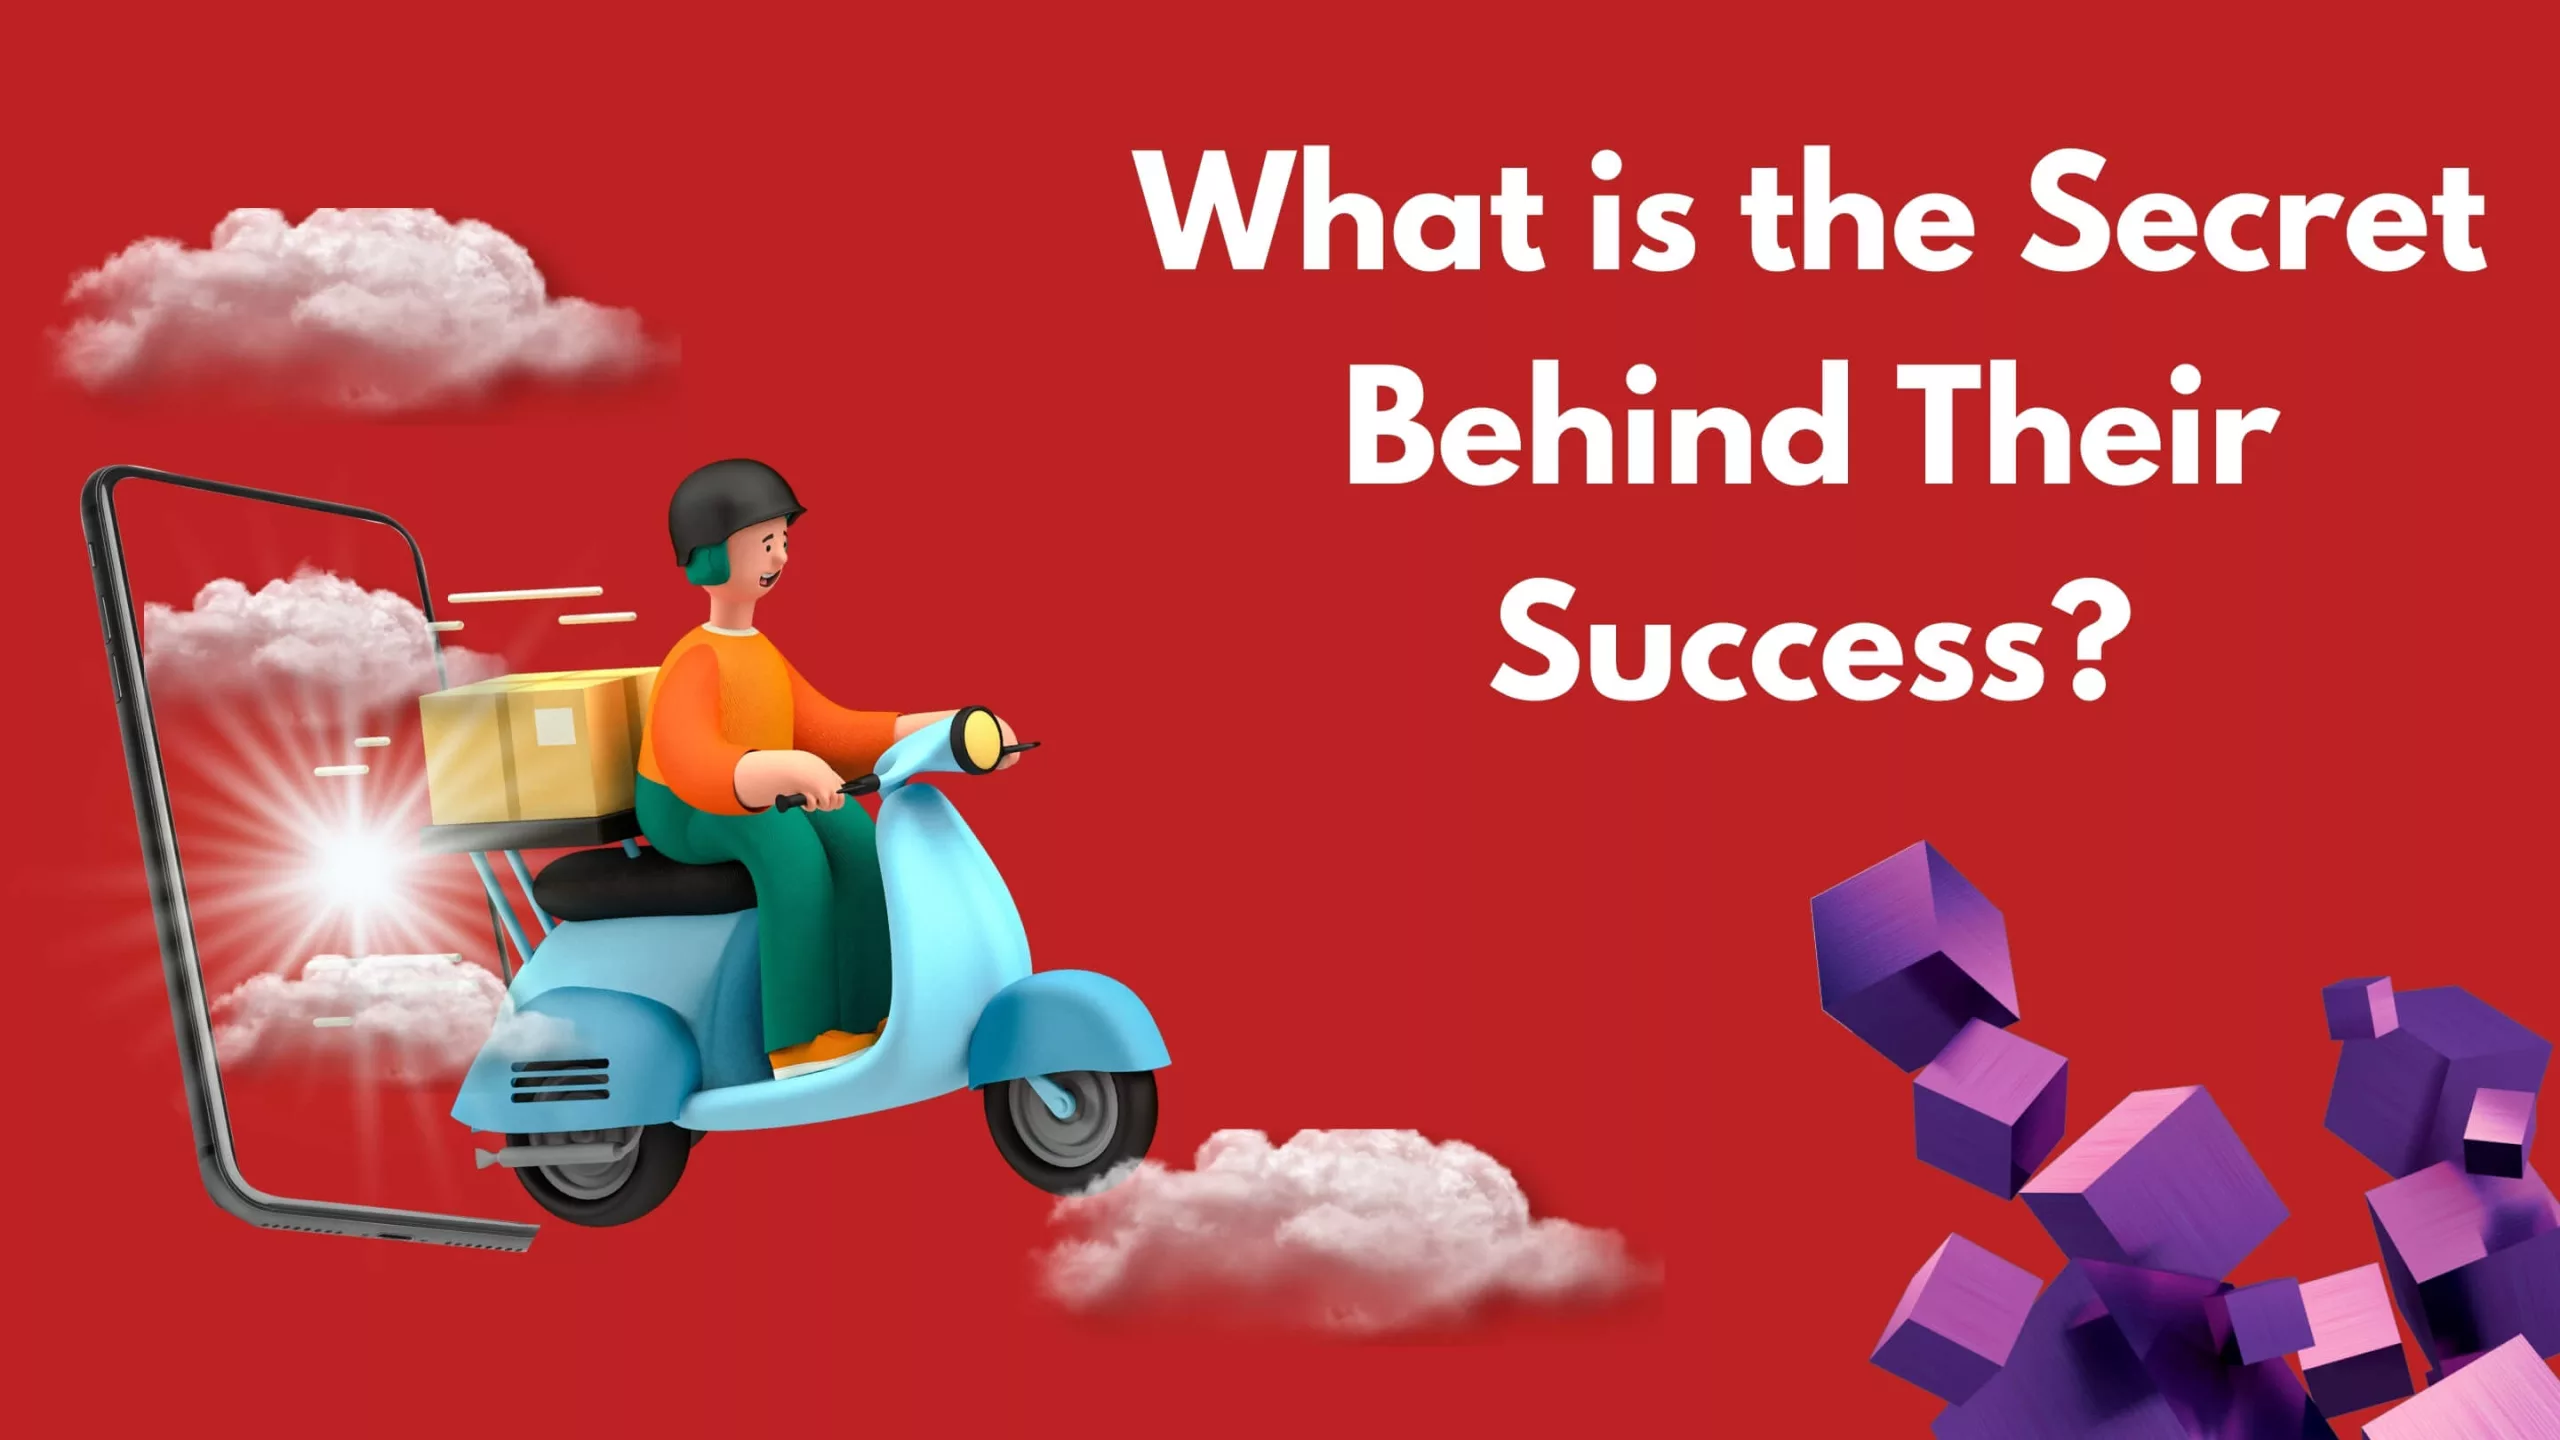 What is the Secret Behind Their Success?